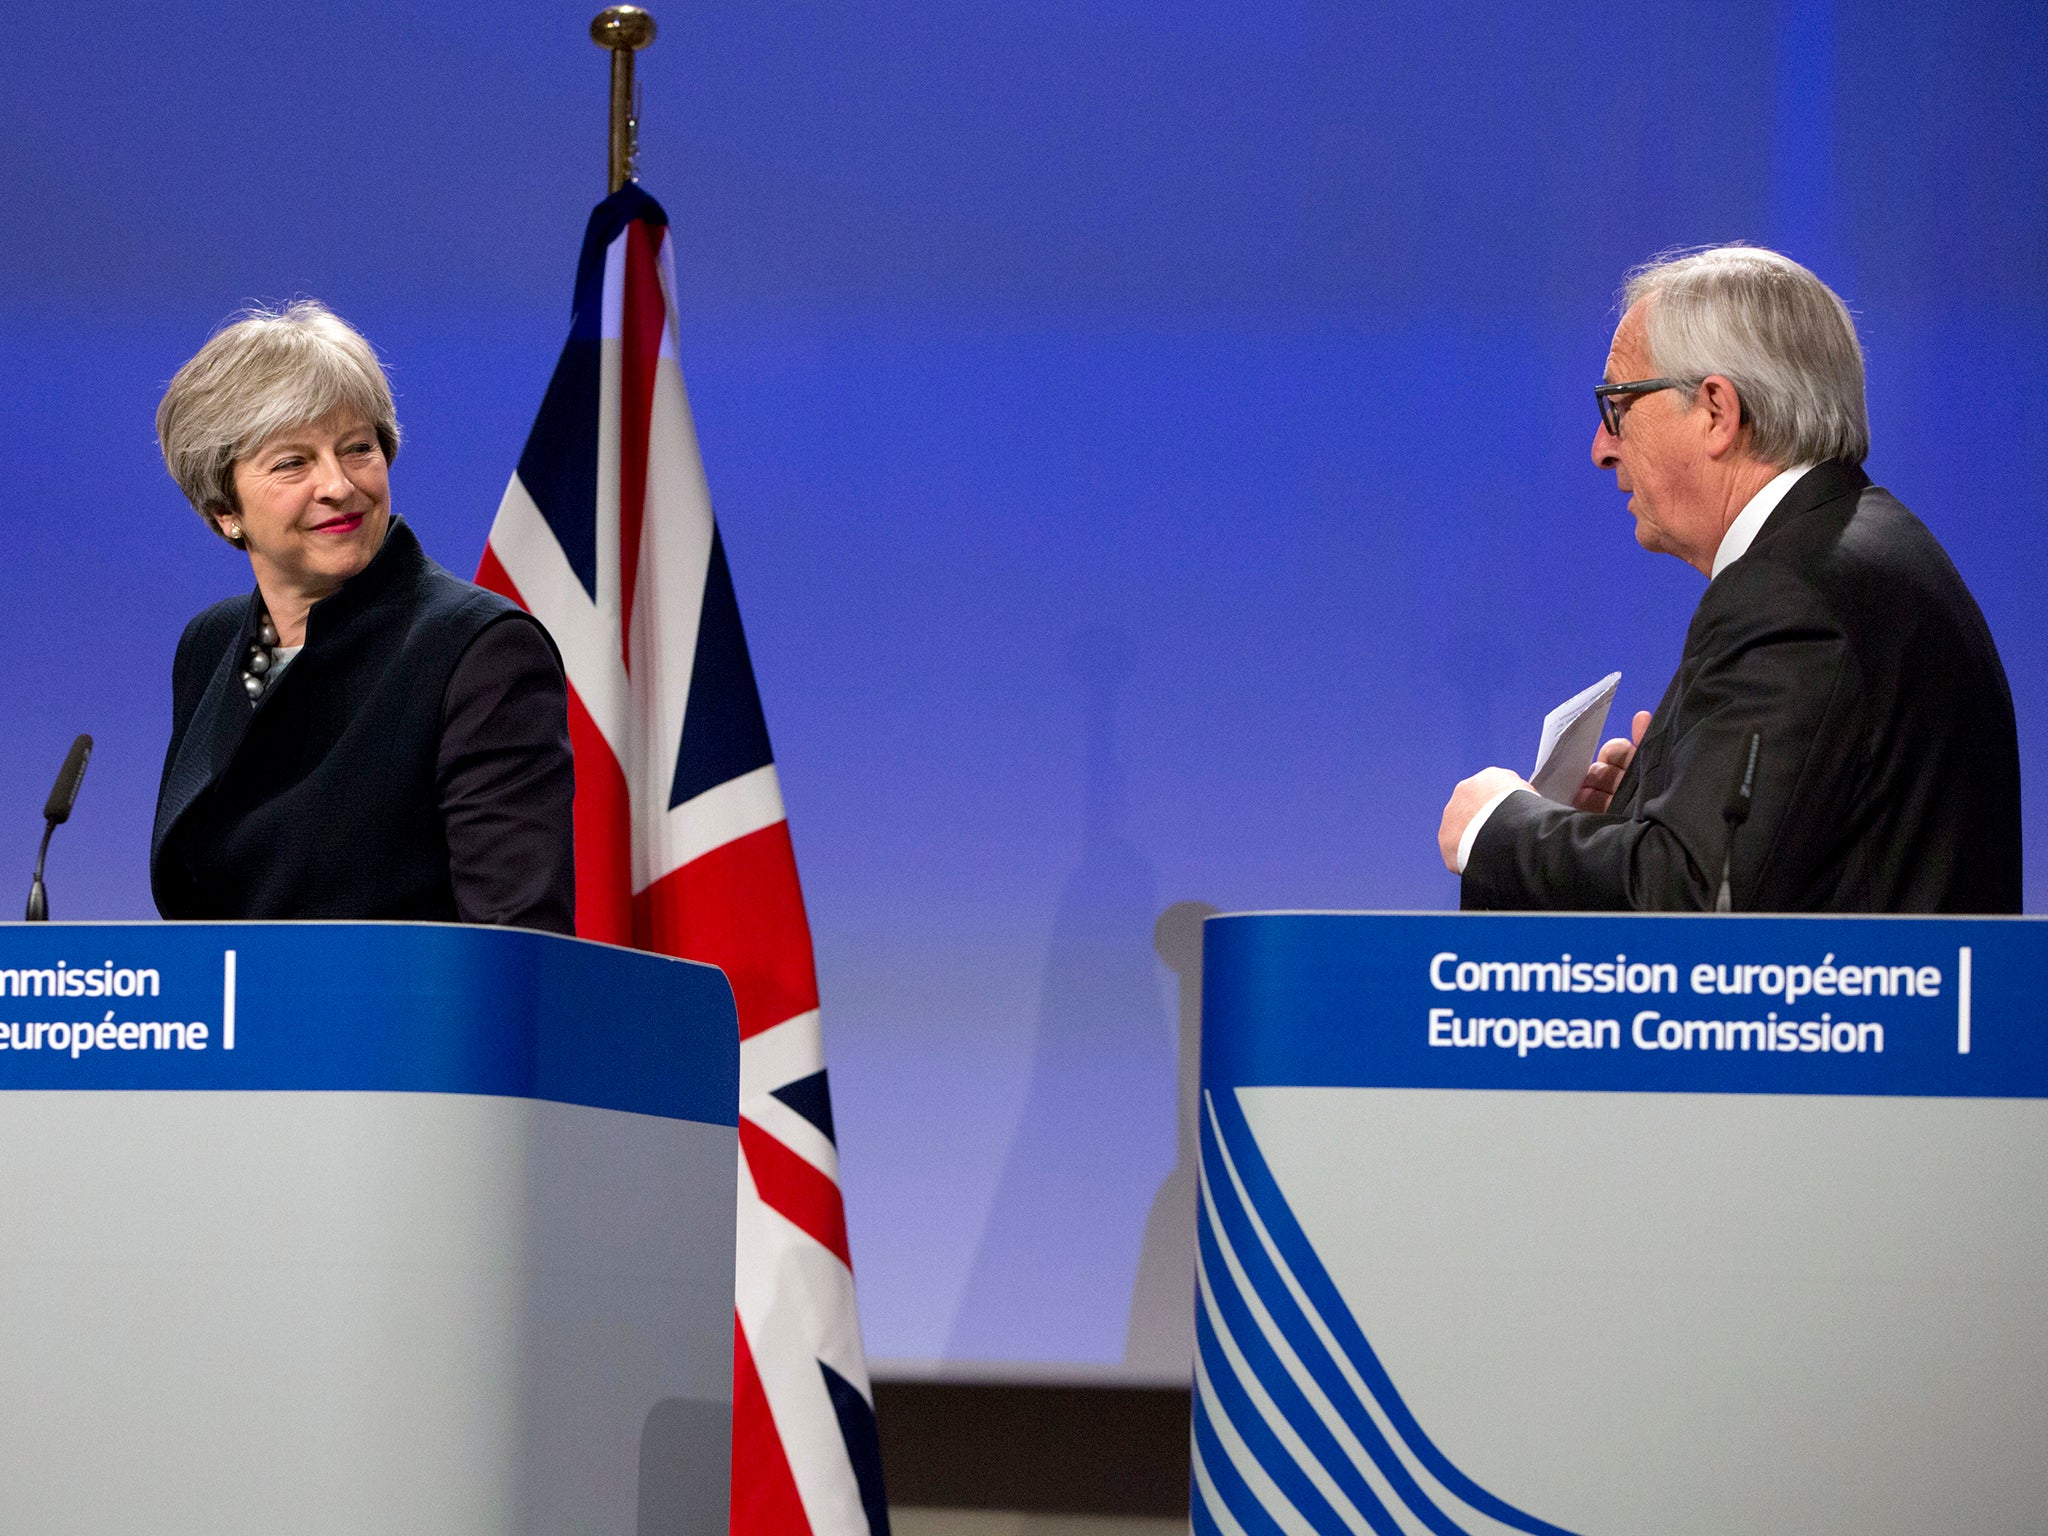 Ms May and Jean Claude Juncker's press conference was all over in two minutes